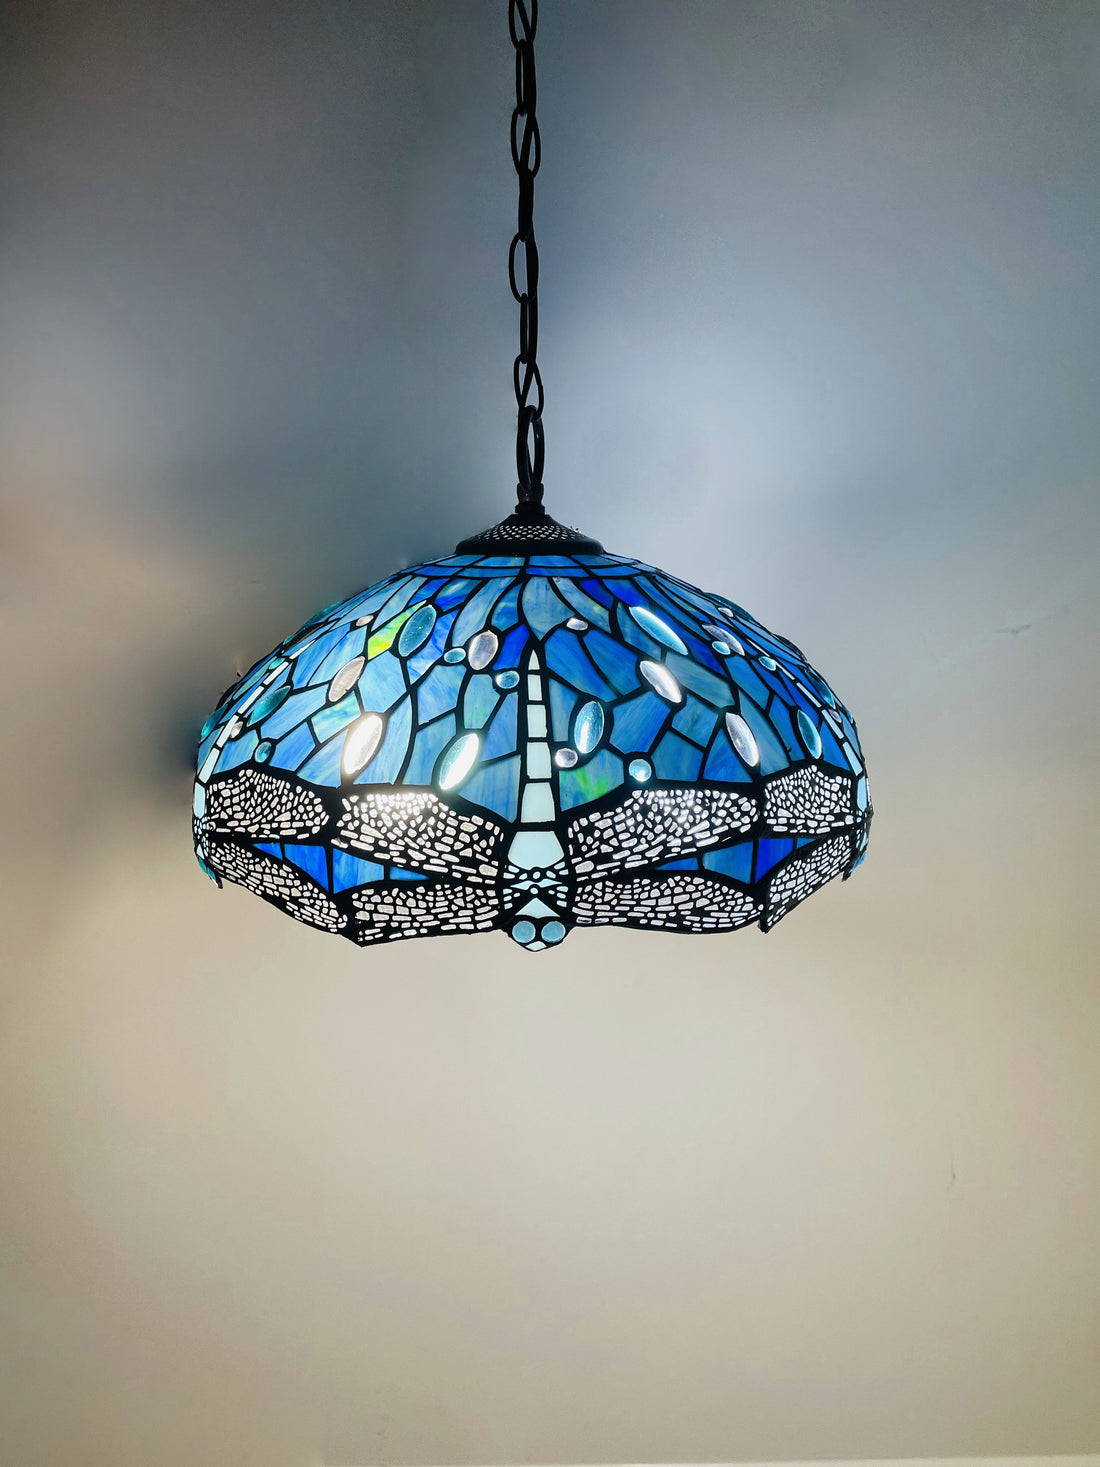 Sea Blue Dragonfly Tiffany Hanging Lamp 16in, Leadglass Stained Glass Shade, Crystal Bead Lampshade, Pendant, Chandelier, Hampton, Beach